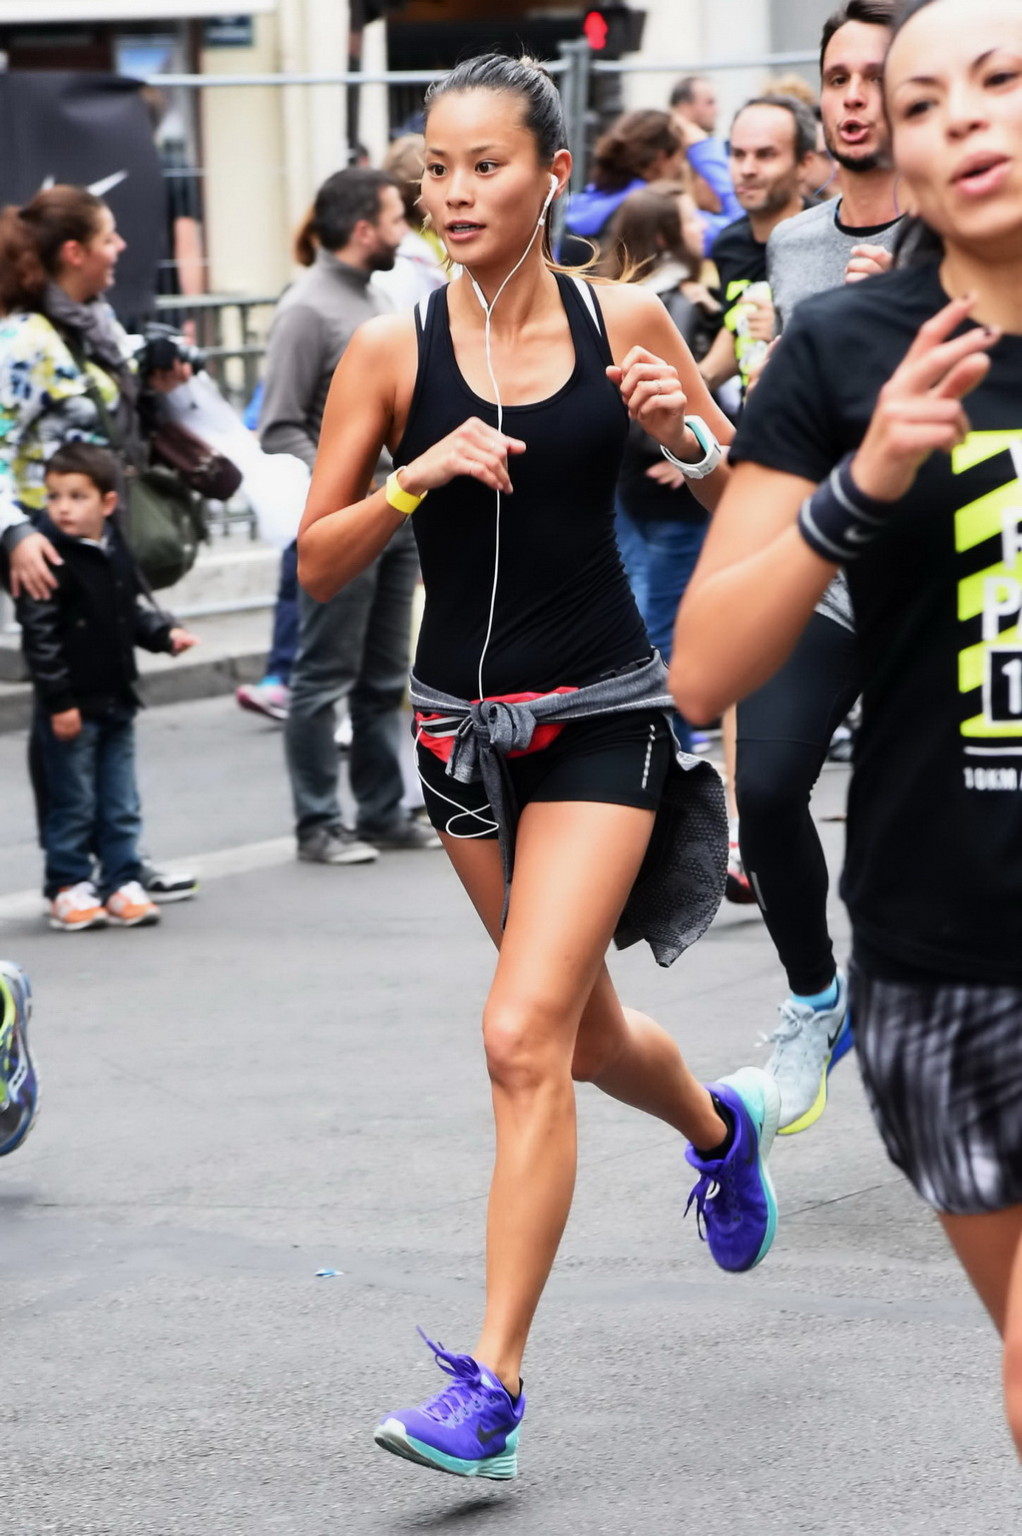 Jamie Chung wearing tiny black top and shorts while running in the Nike 10km Par #75184188